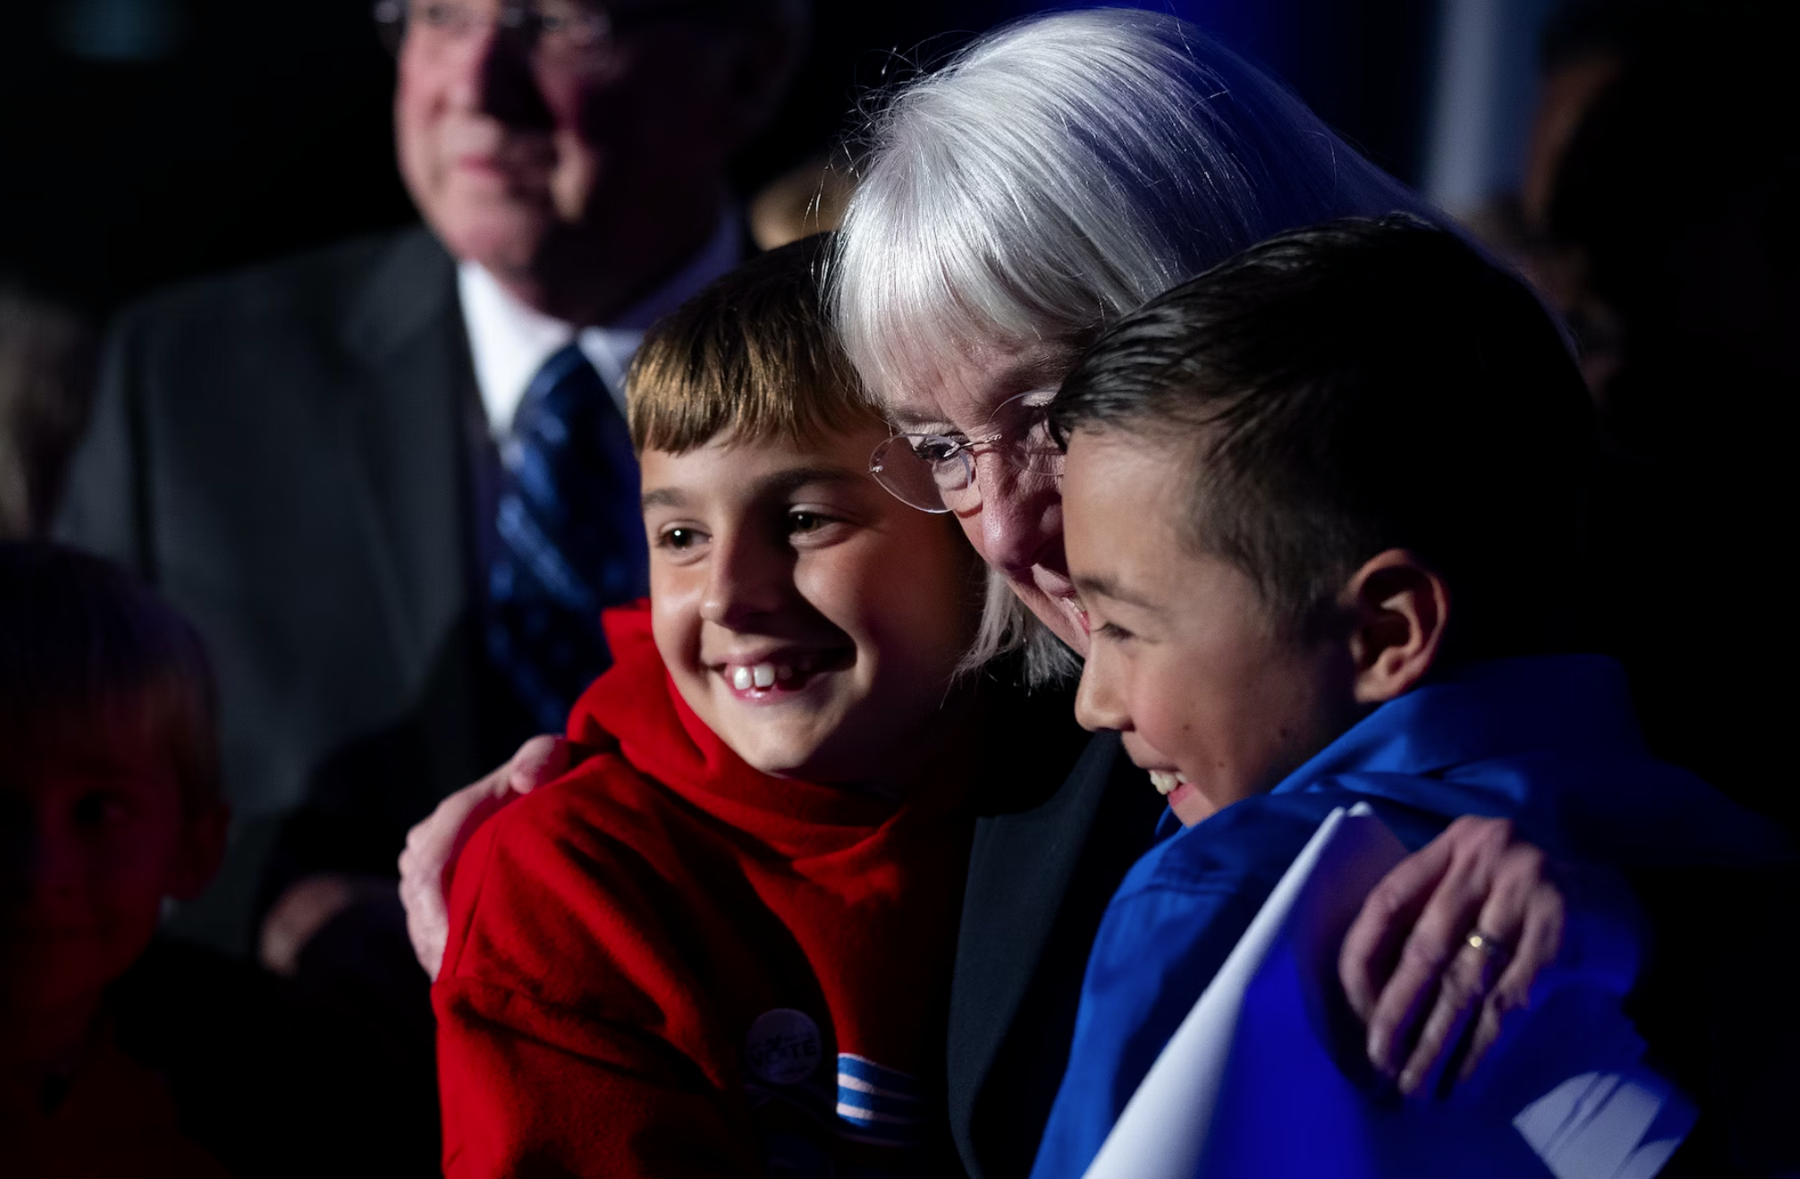 Senator Patty Murray celebrates with family on stage after speaking to supporters during an election night party on Tuesday, November 8, 2022, at the Westin in Bellevue.